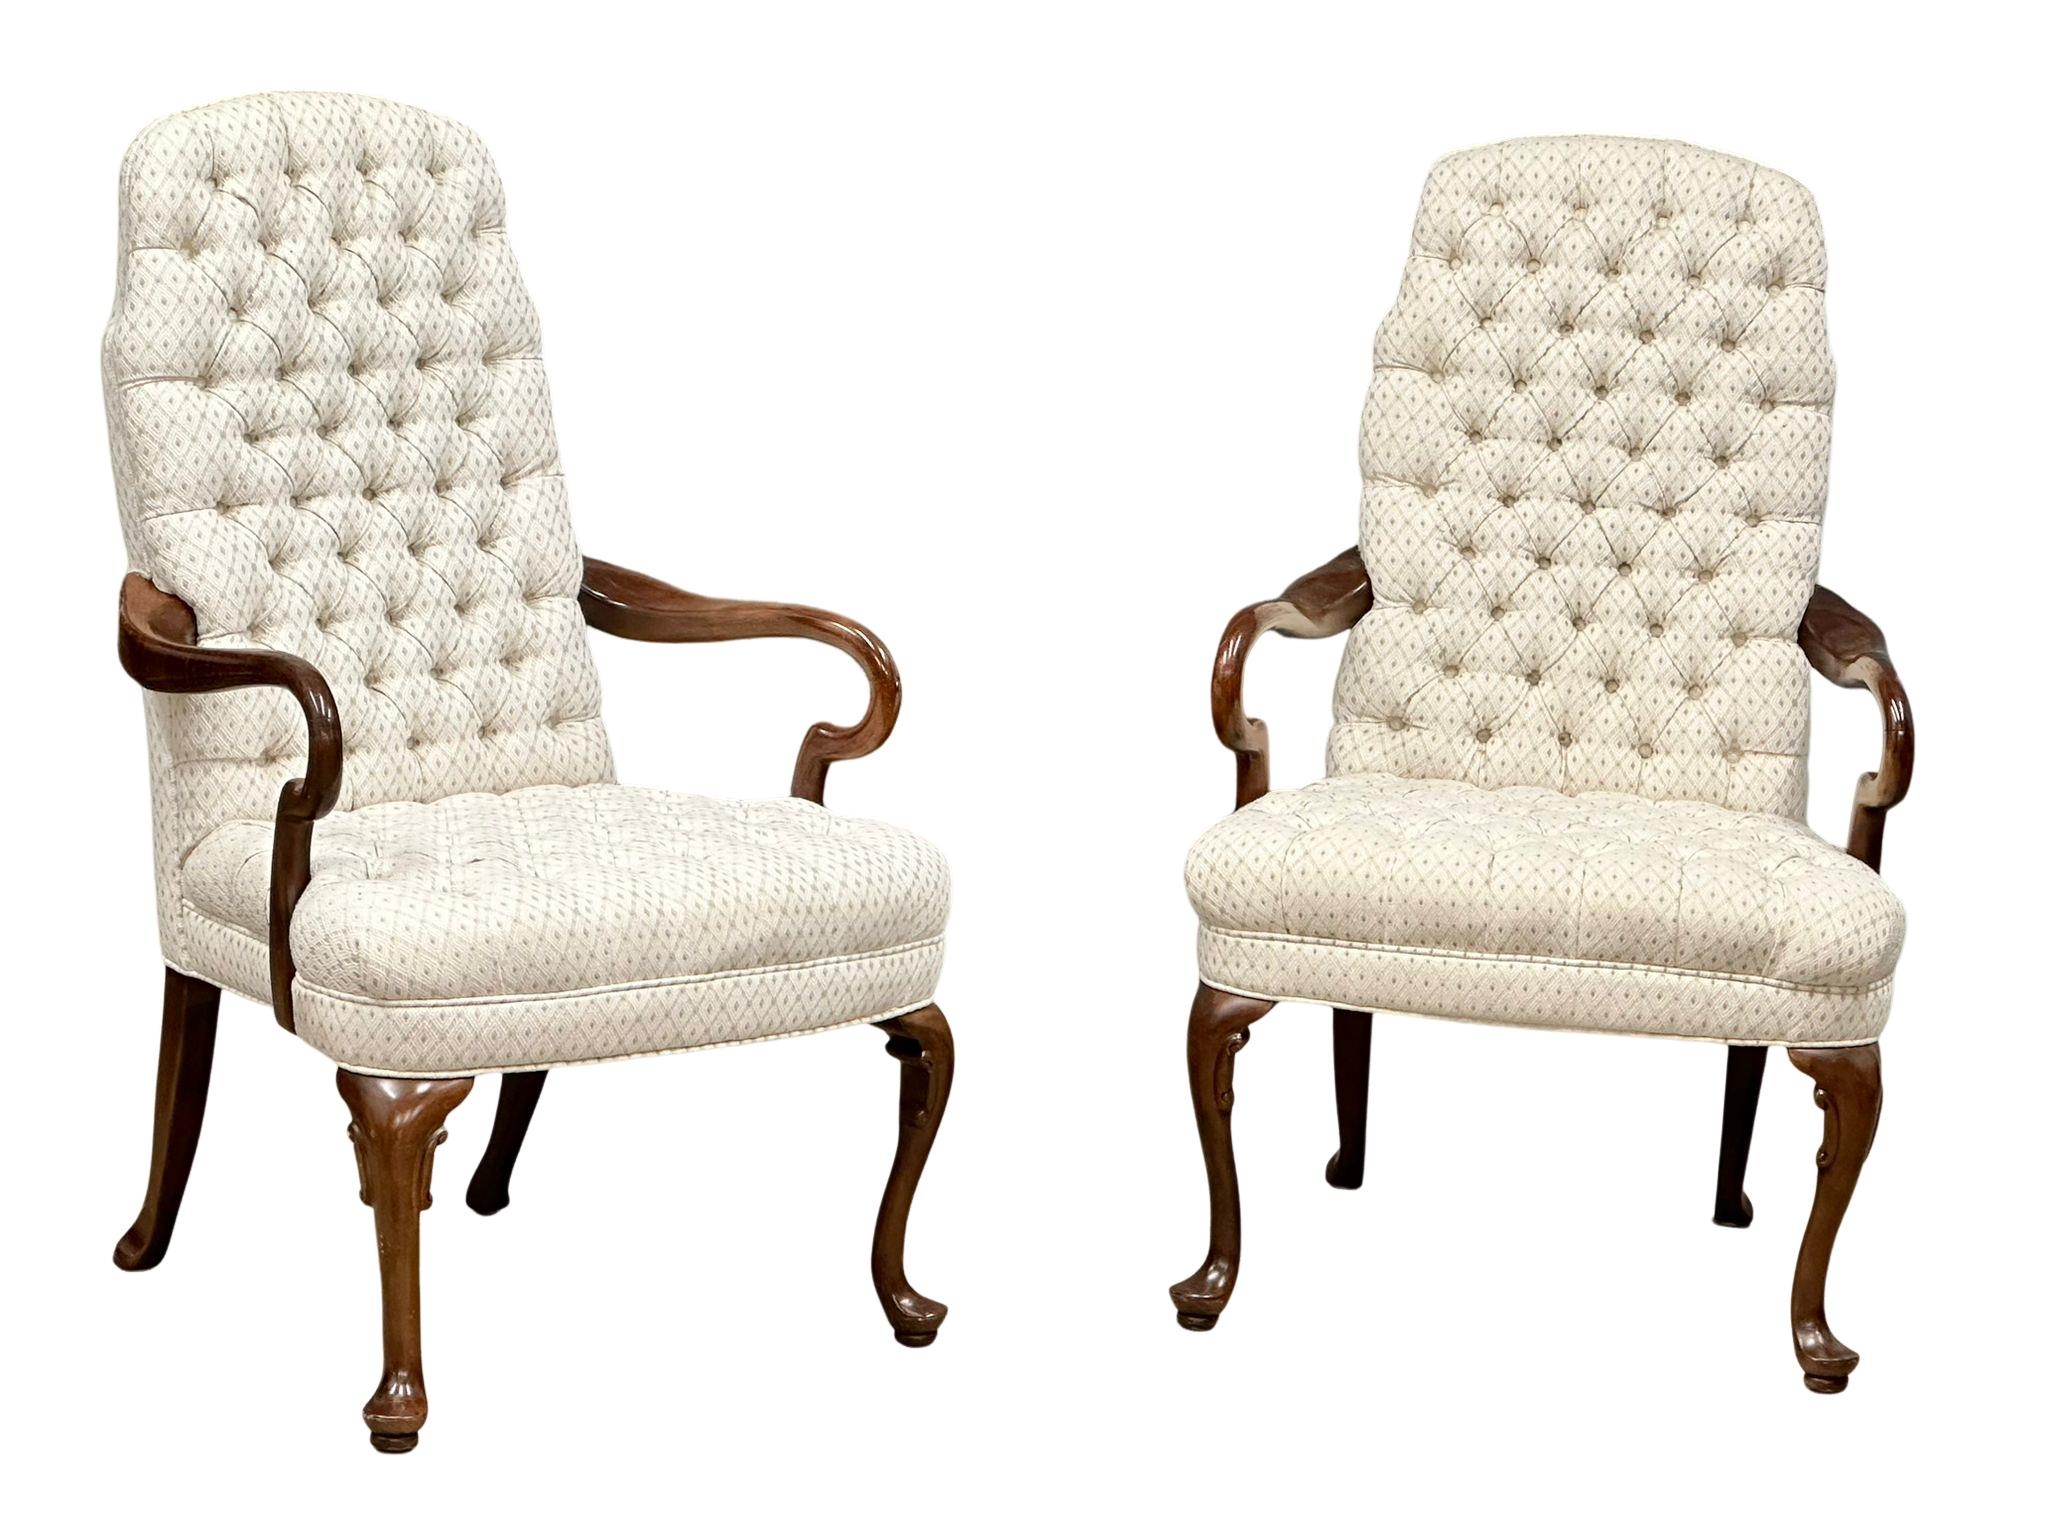 A pair of good quality George I style deep button back armchairs.(1) - Image 5 of 8